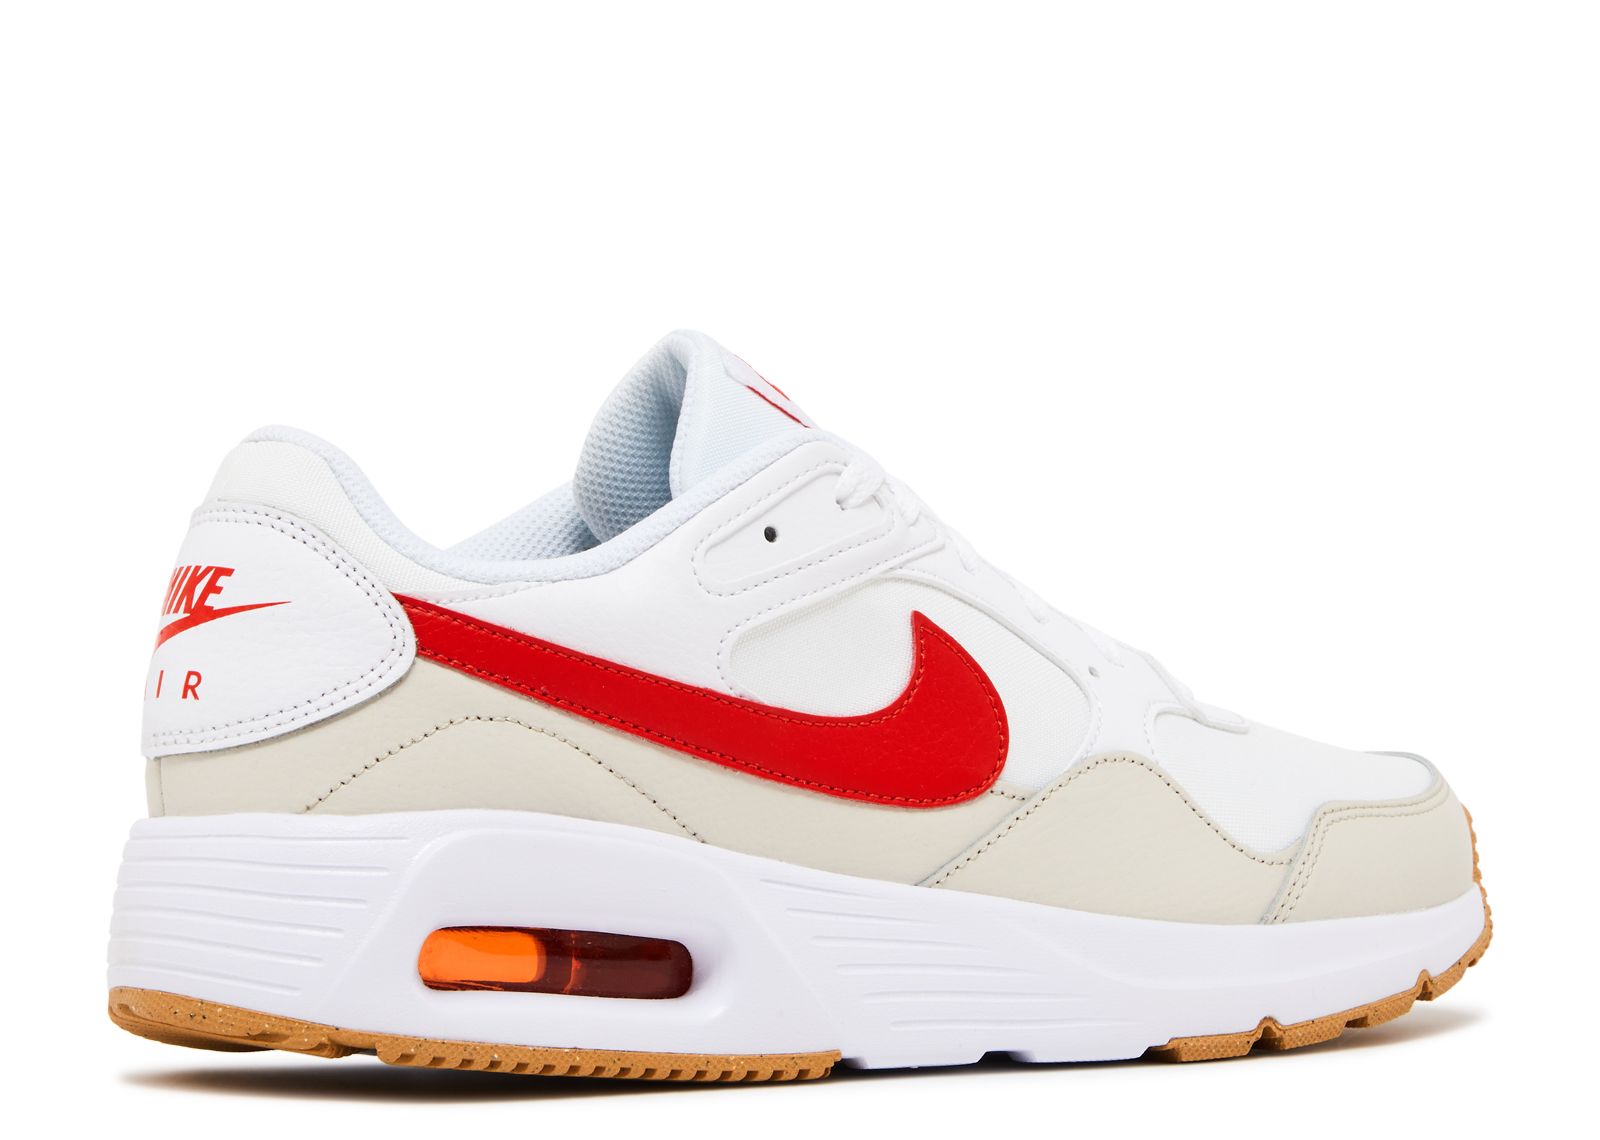 Air Max SC 'White Picante Red' - Nike - CW4555 112 - white/light orewood  brown/gum light brown/picante red | Flight Club